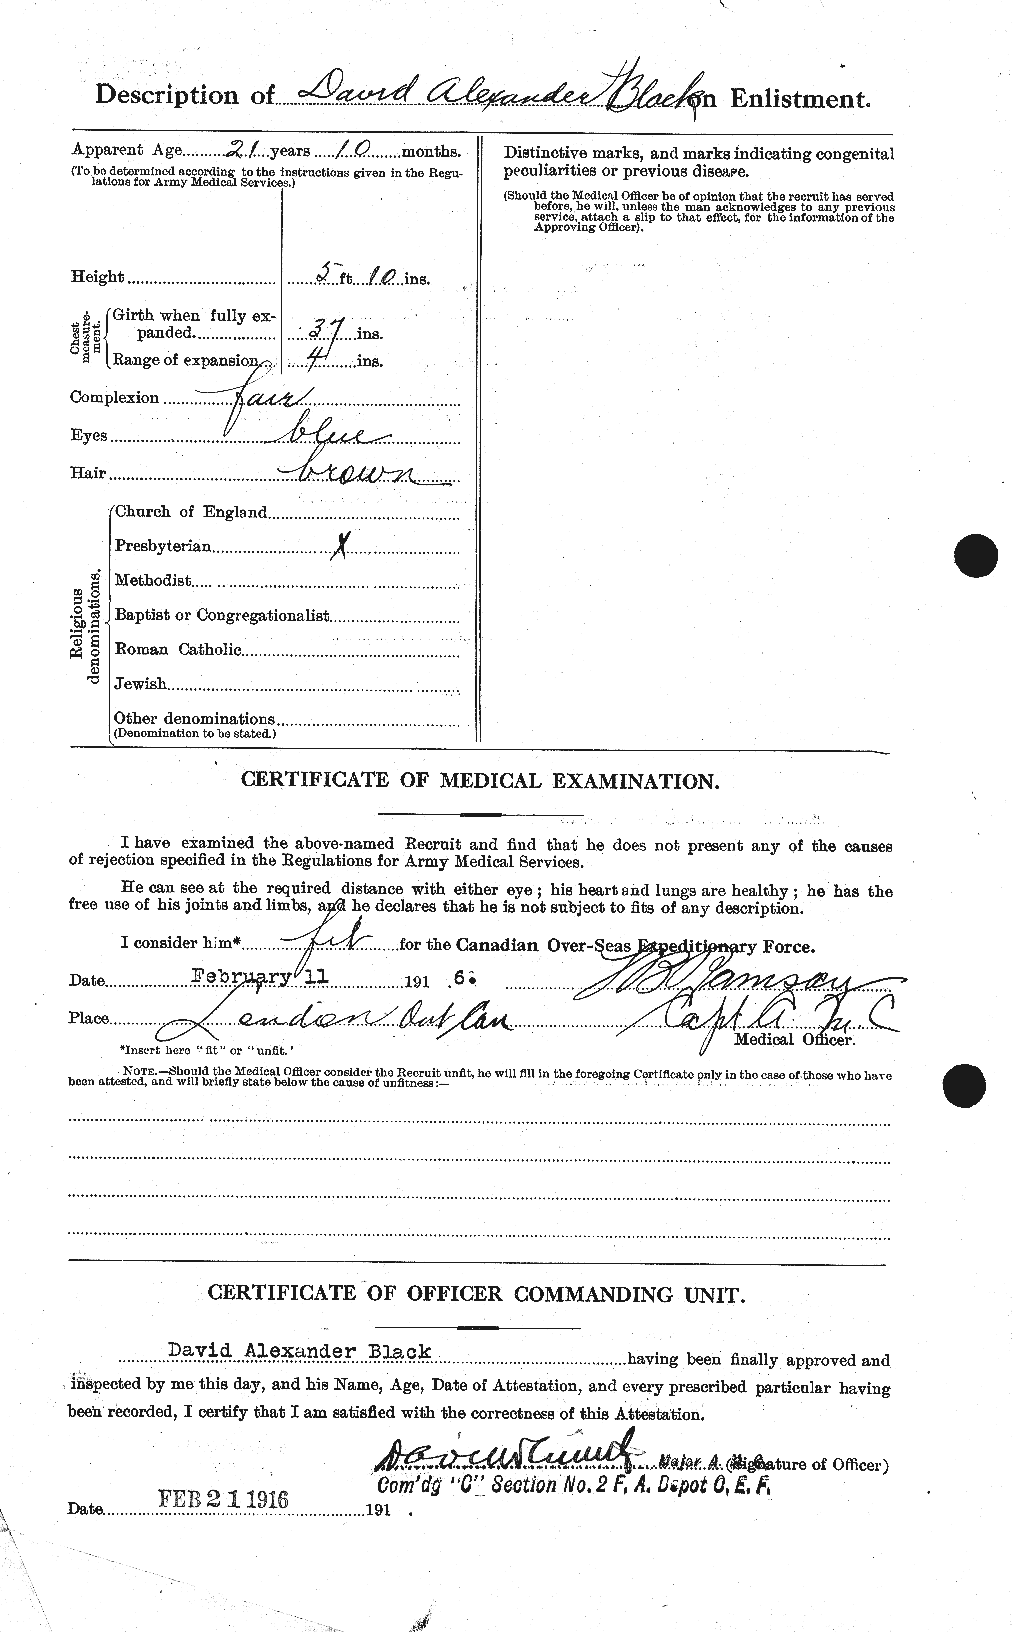 Personnel Records of the First World War - CEF 241277b